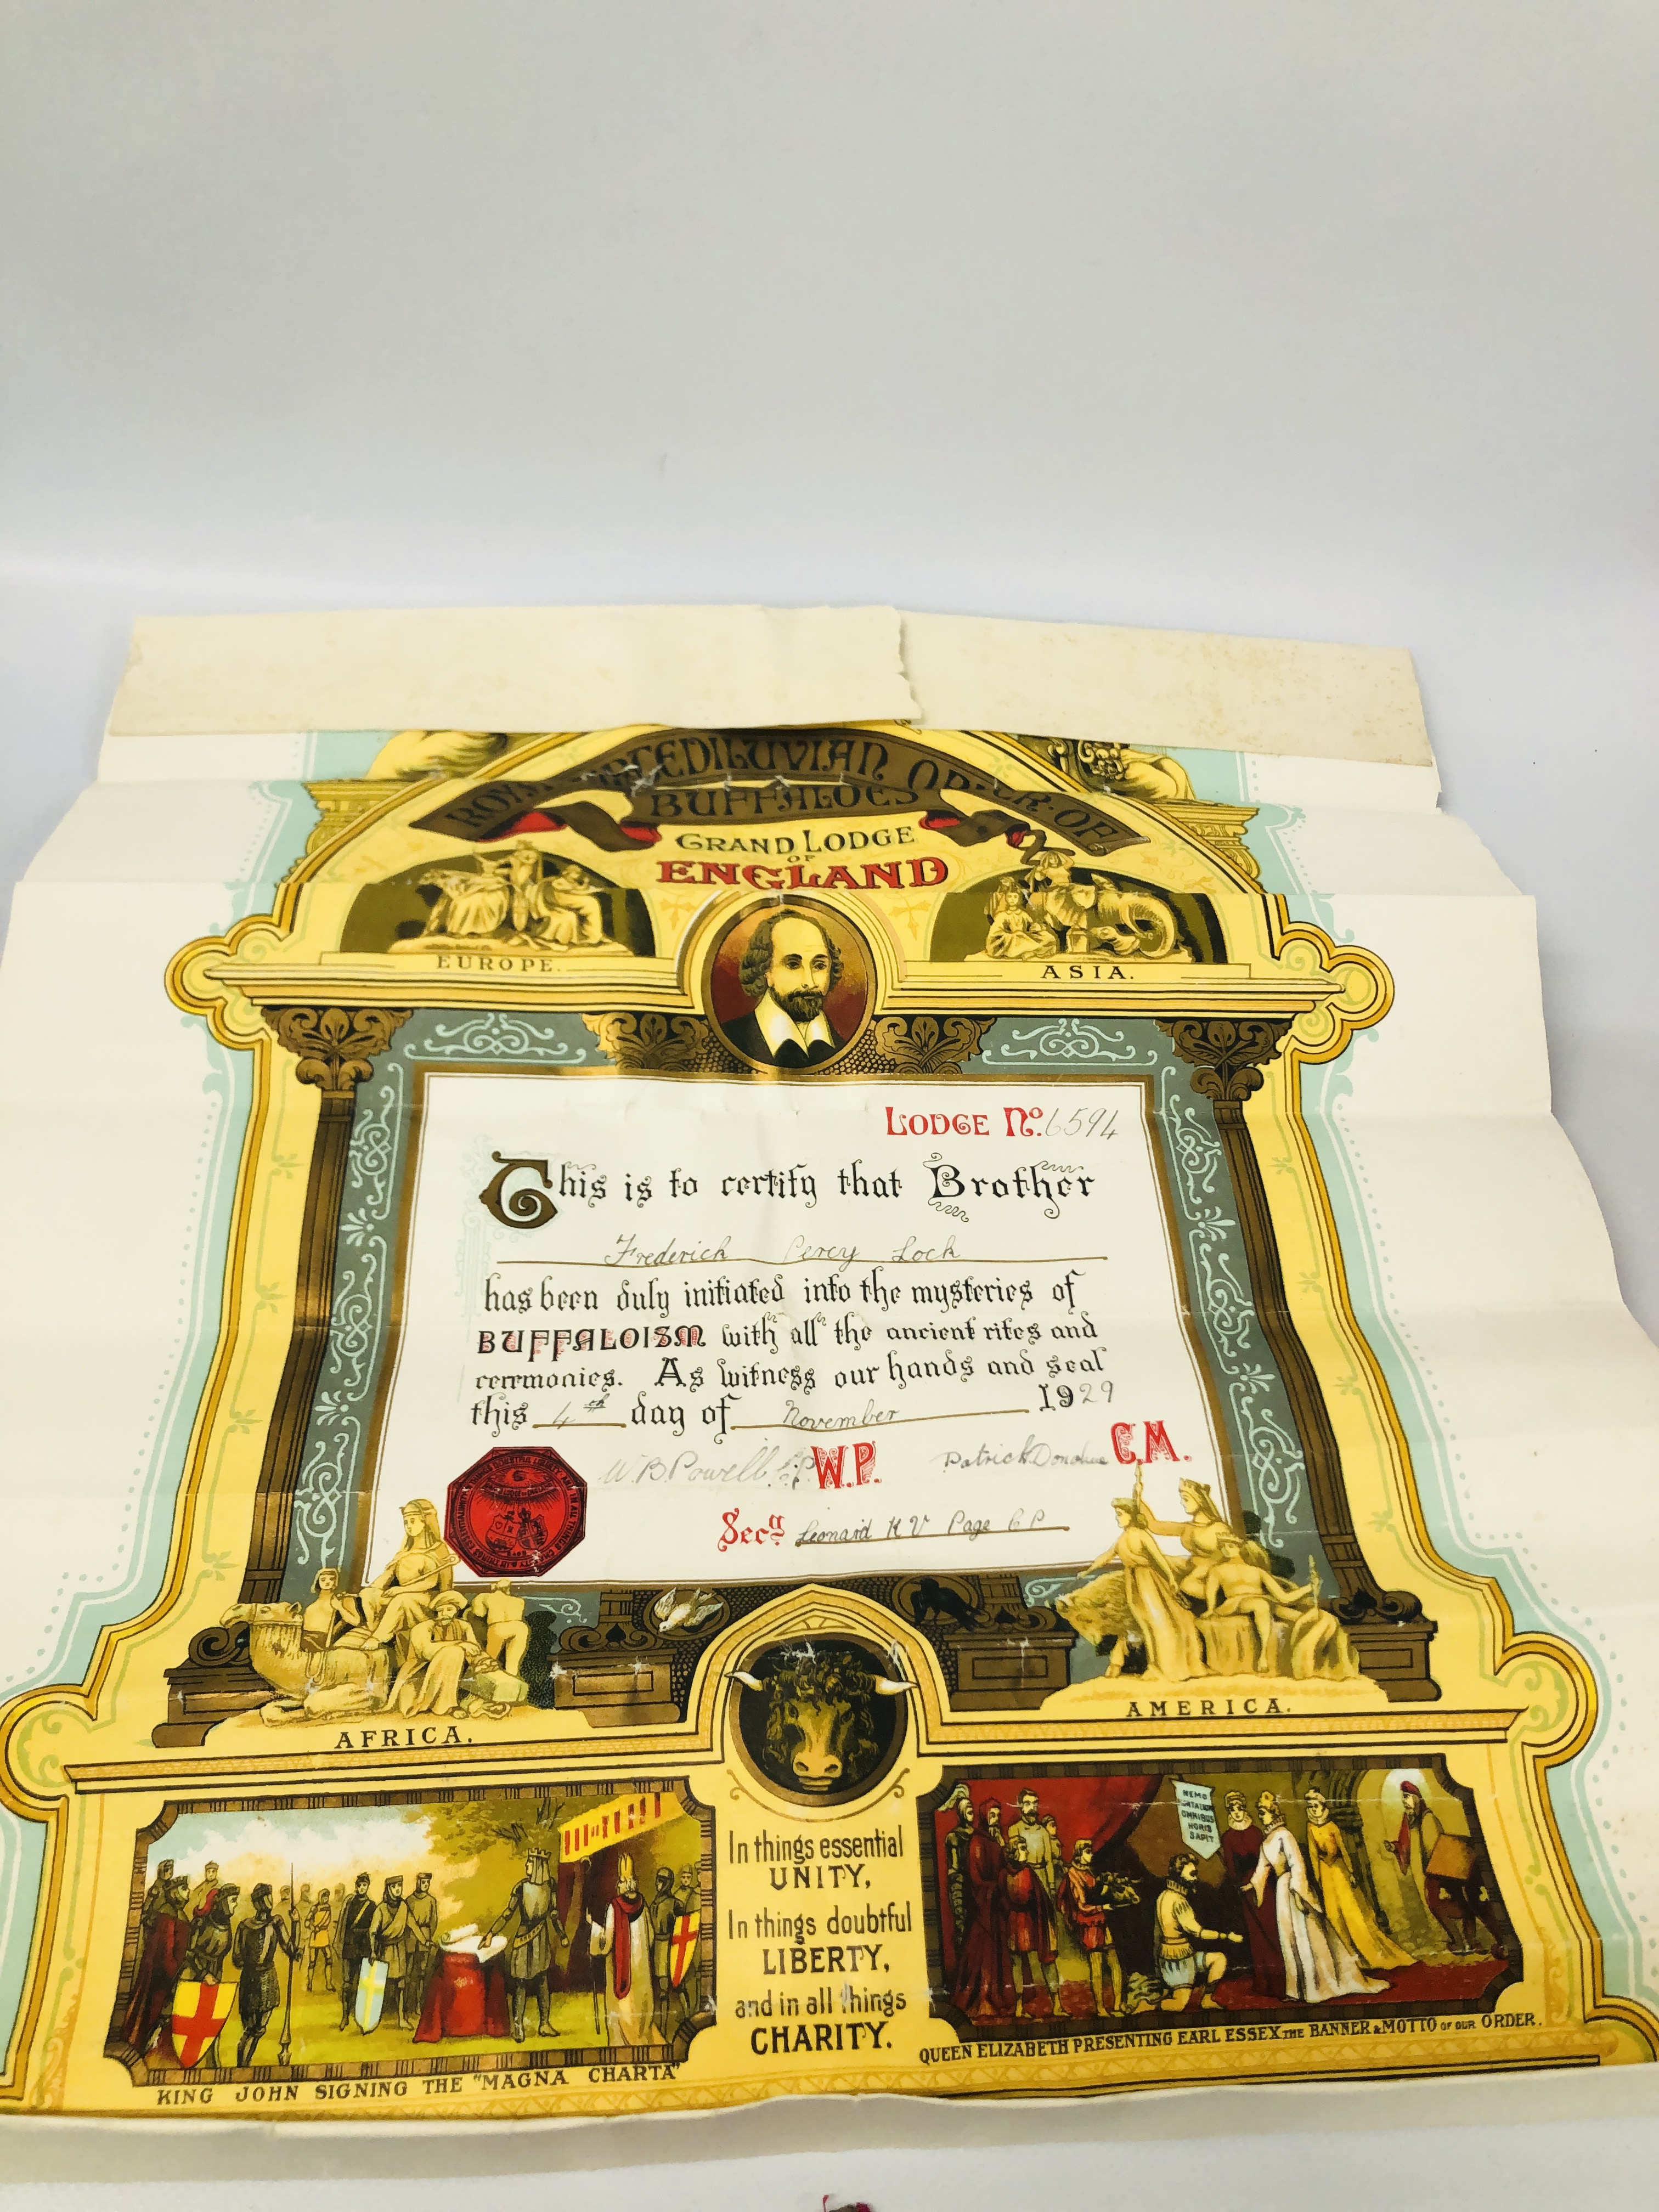 A COLLECTION OF ROYAL ANTEDILUVIAN ORDER OF BUFFALOES REGALIA, MANUALS ETC. - Image 2 of 6